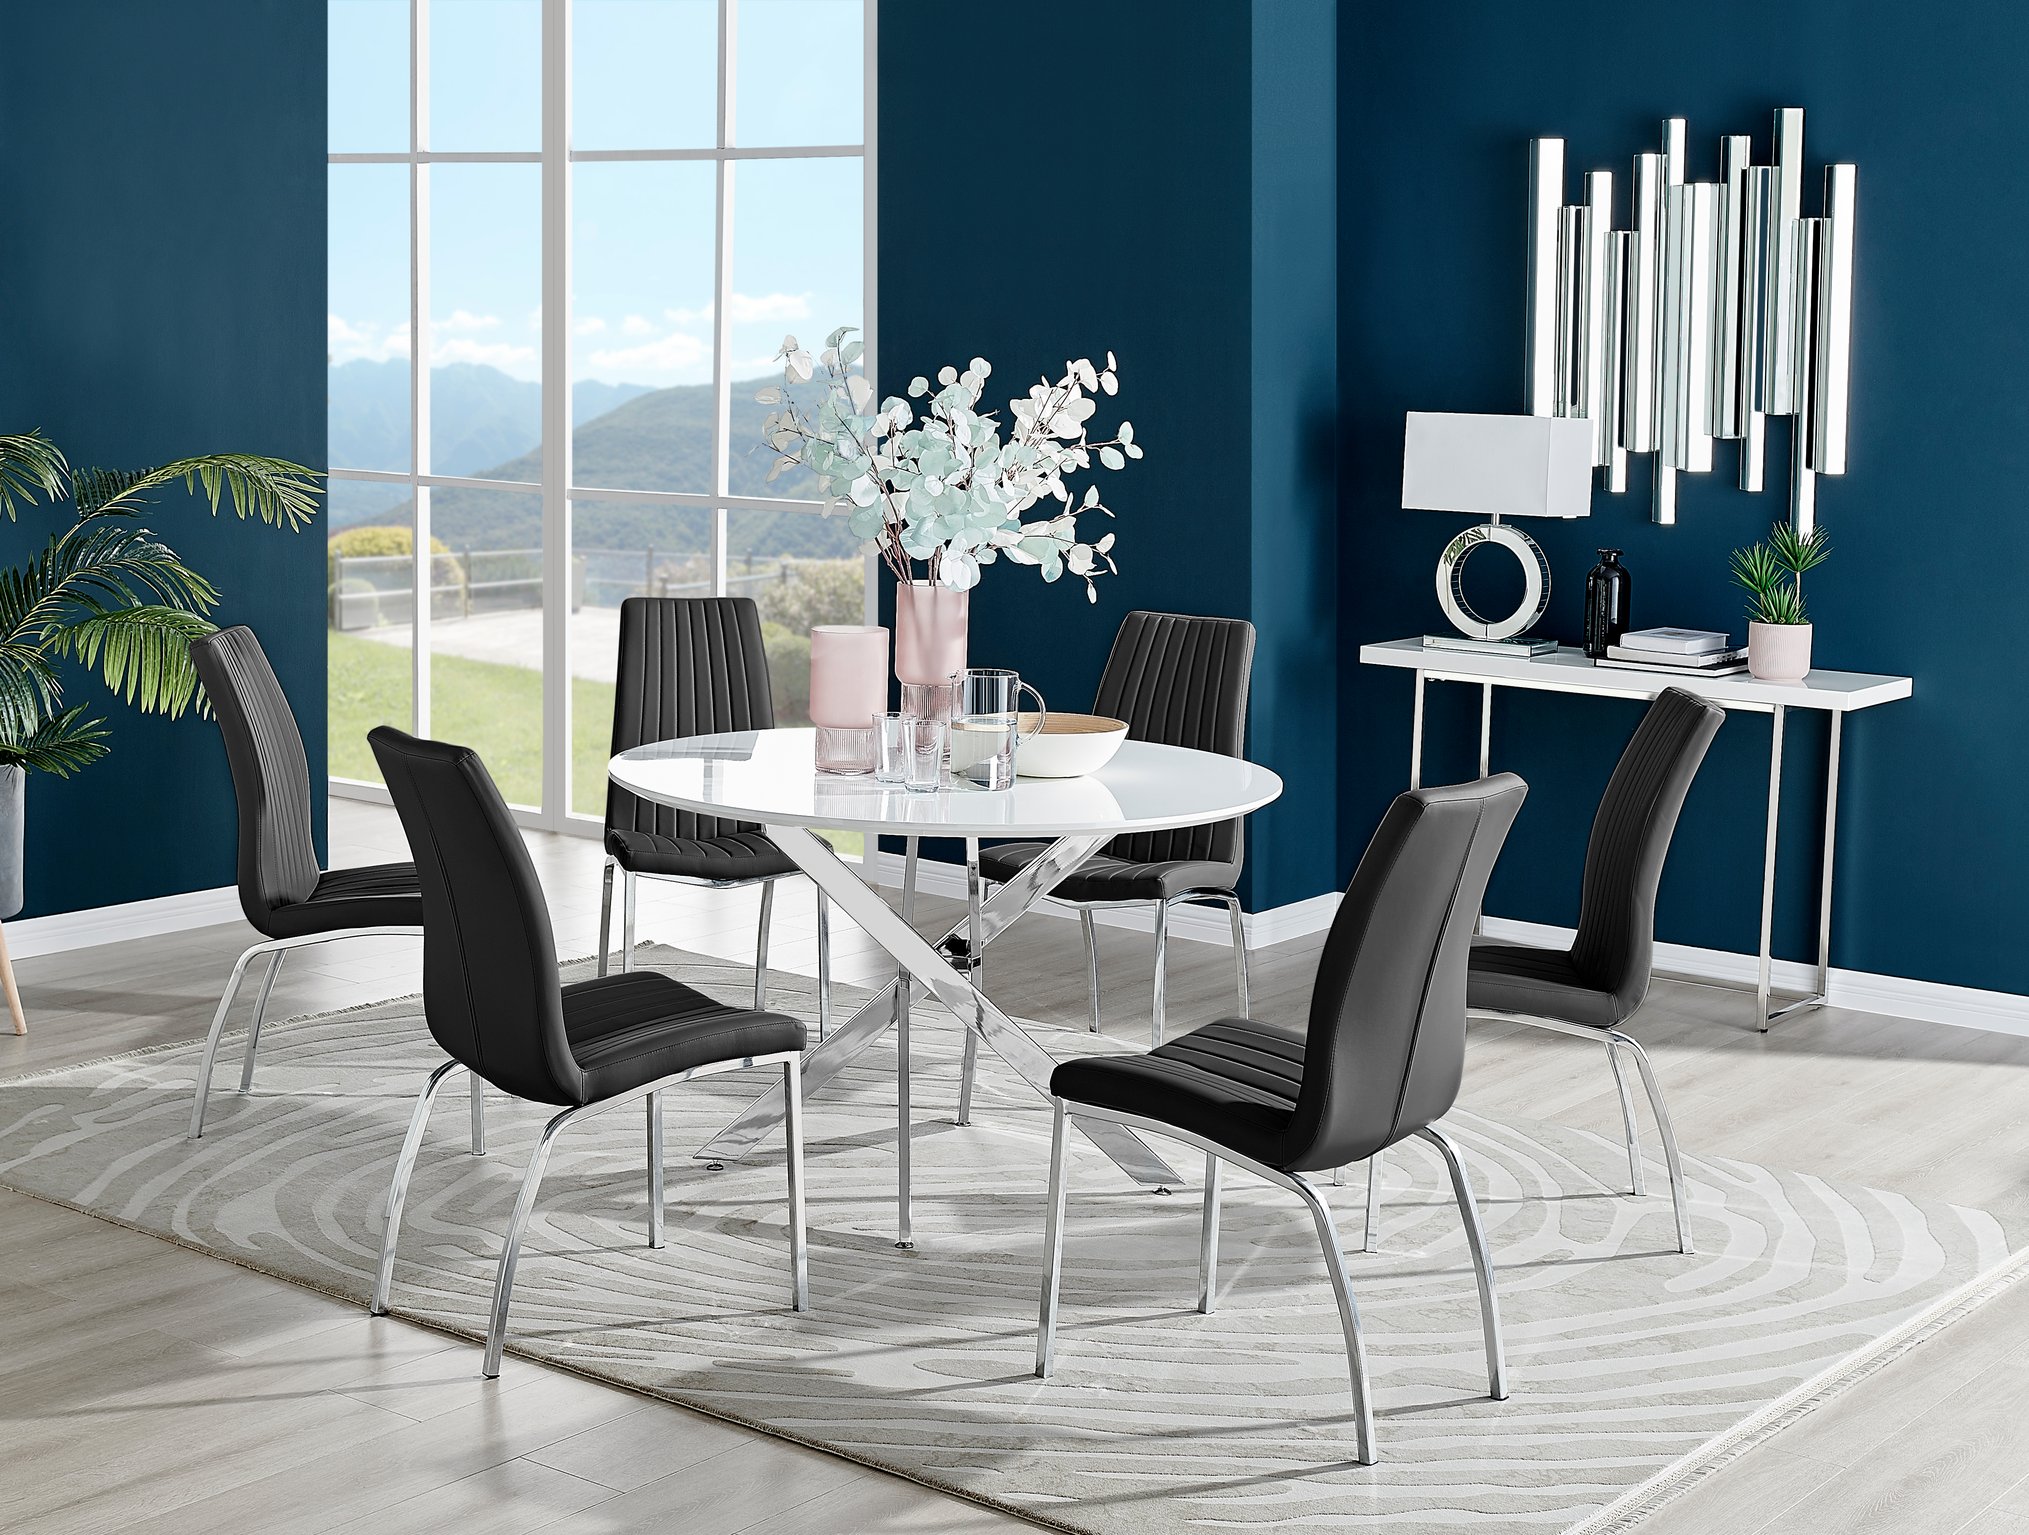 Novara White High Gloss Round Dining Table 120cm and 6 Isco Chairs Furniture Set